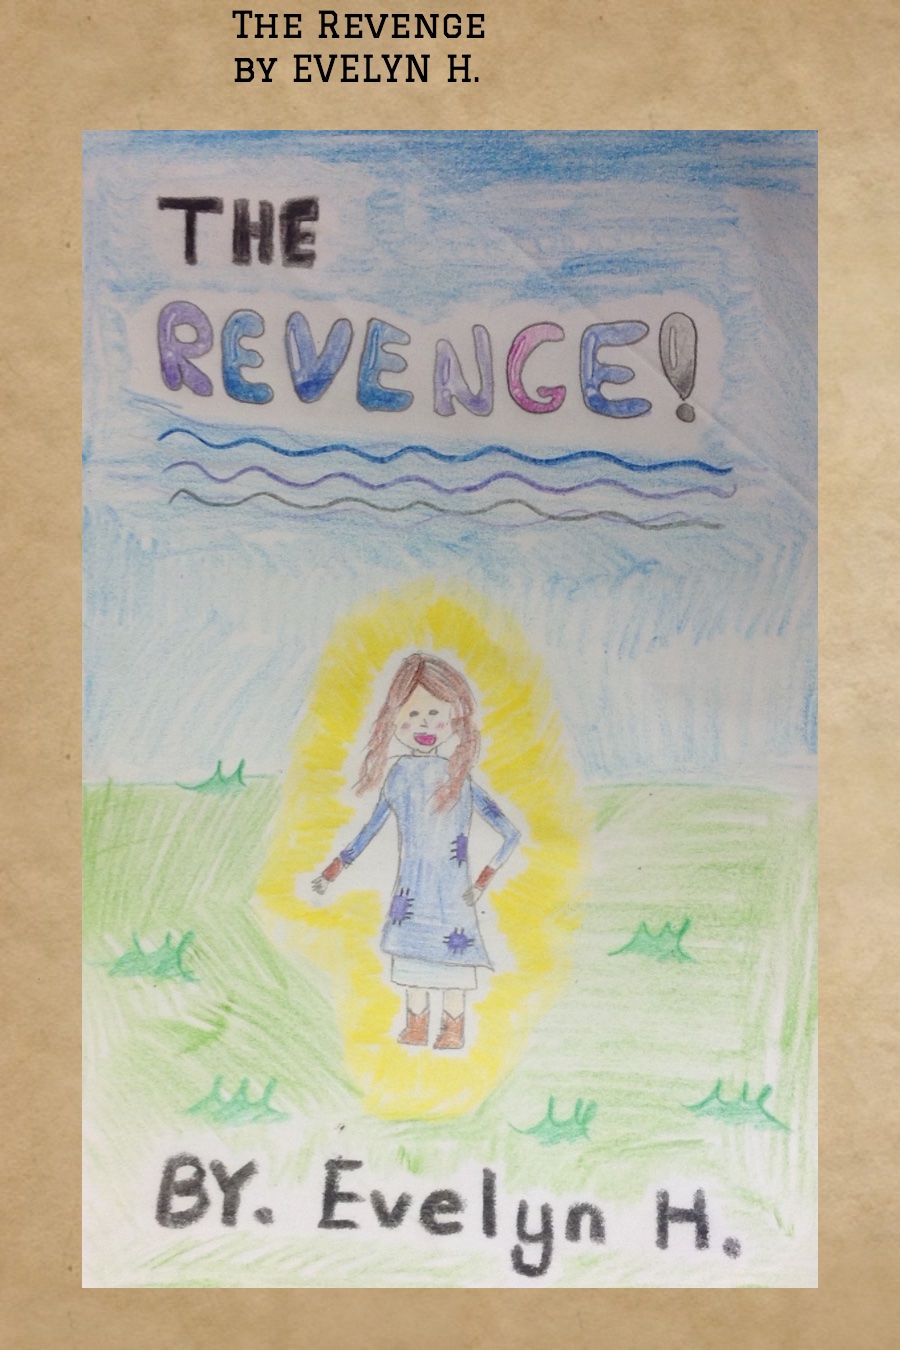 The Revenge by Evelyn H